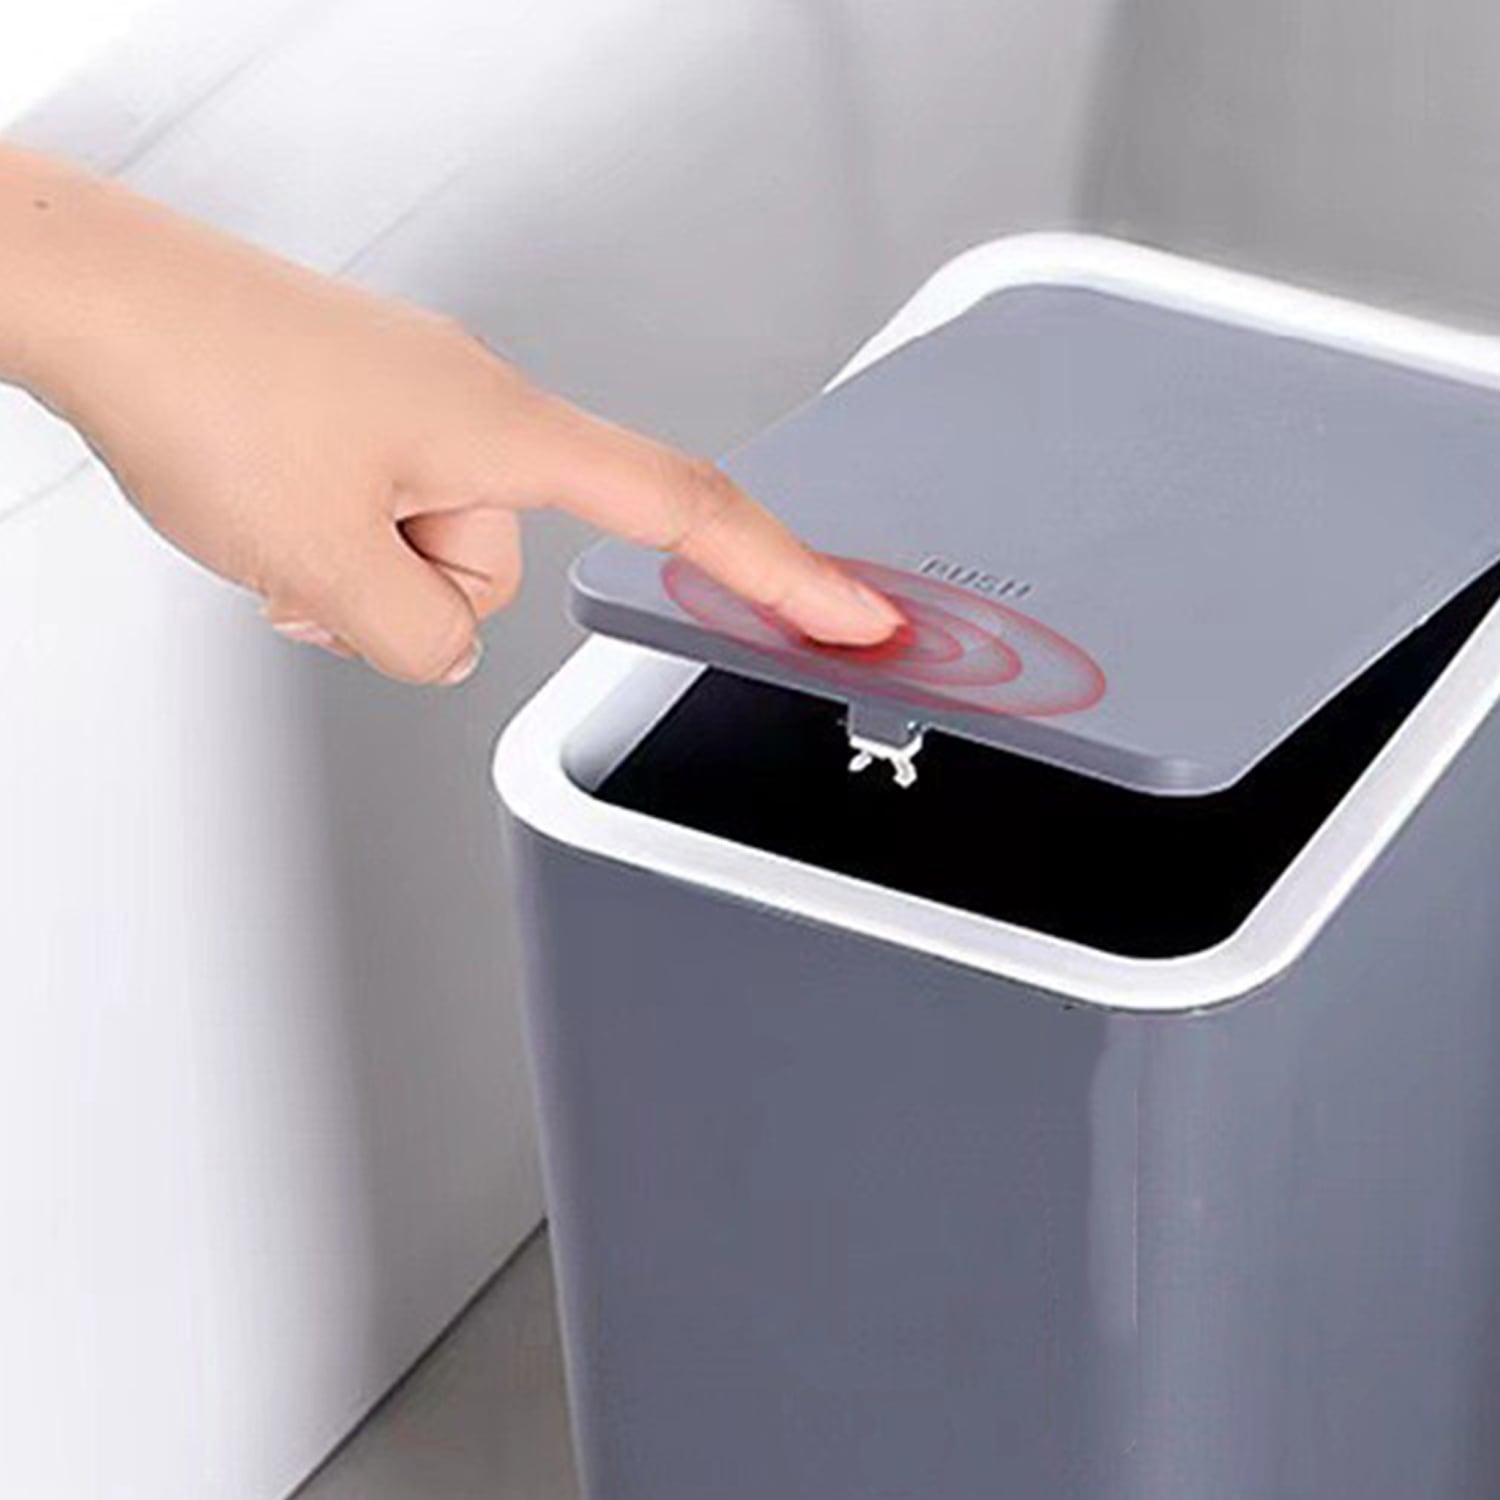 https://ak1.ostkcdn.com/images/products/is/images/direct/400ae0390cba82a5ad9c4da136c1f943dcbdda80/10-Liter-Slim-Trash-Can-with-Press-Top-Lid%2C-2.6-Gallon-Garbage-Bin%2C-for-Home%2C-Office%2C-Bathroom.jpg